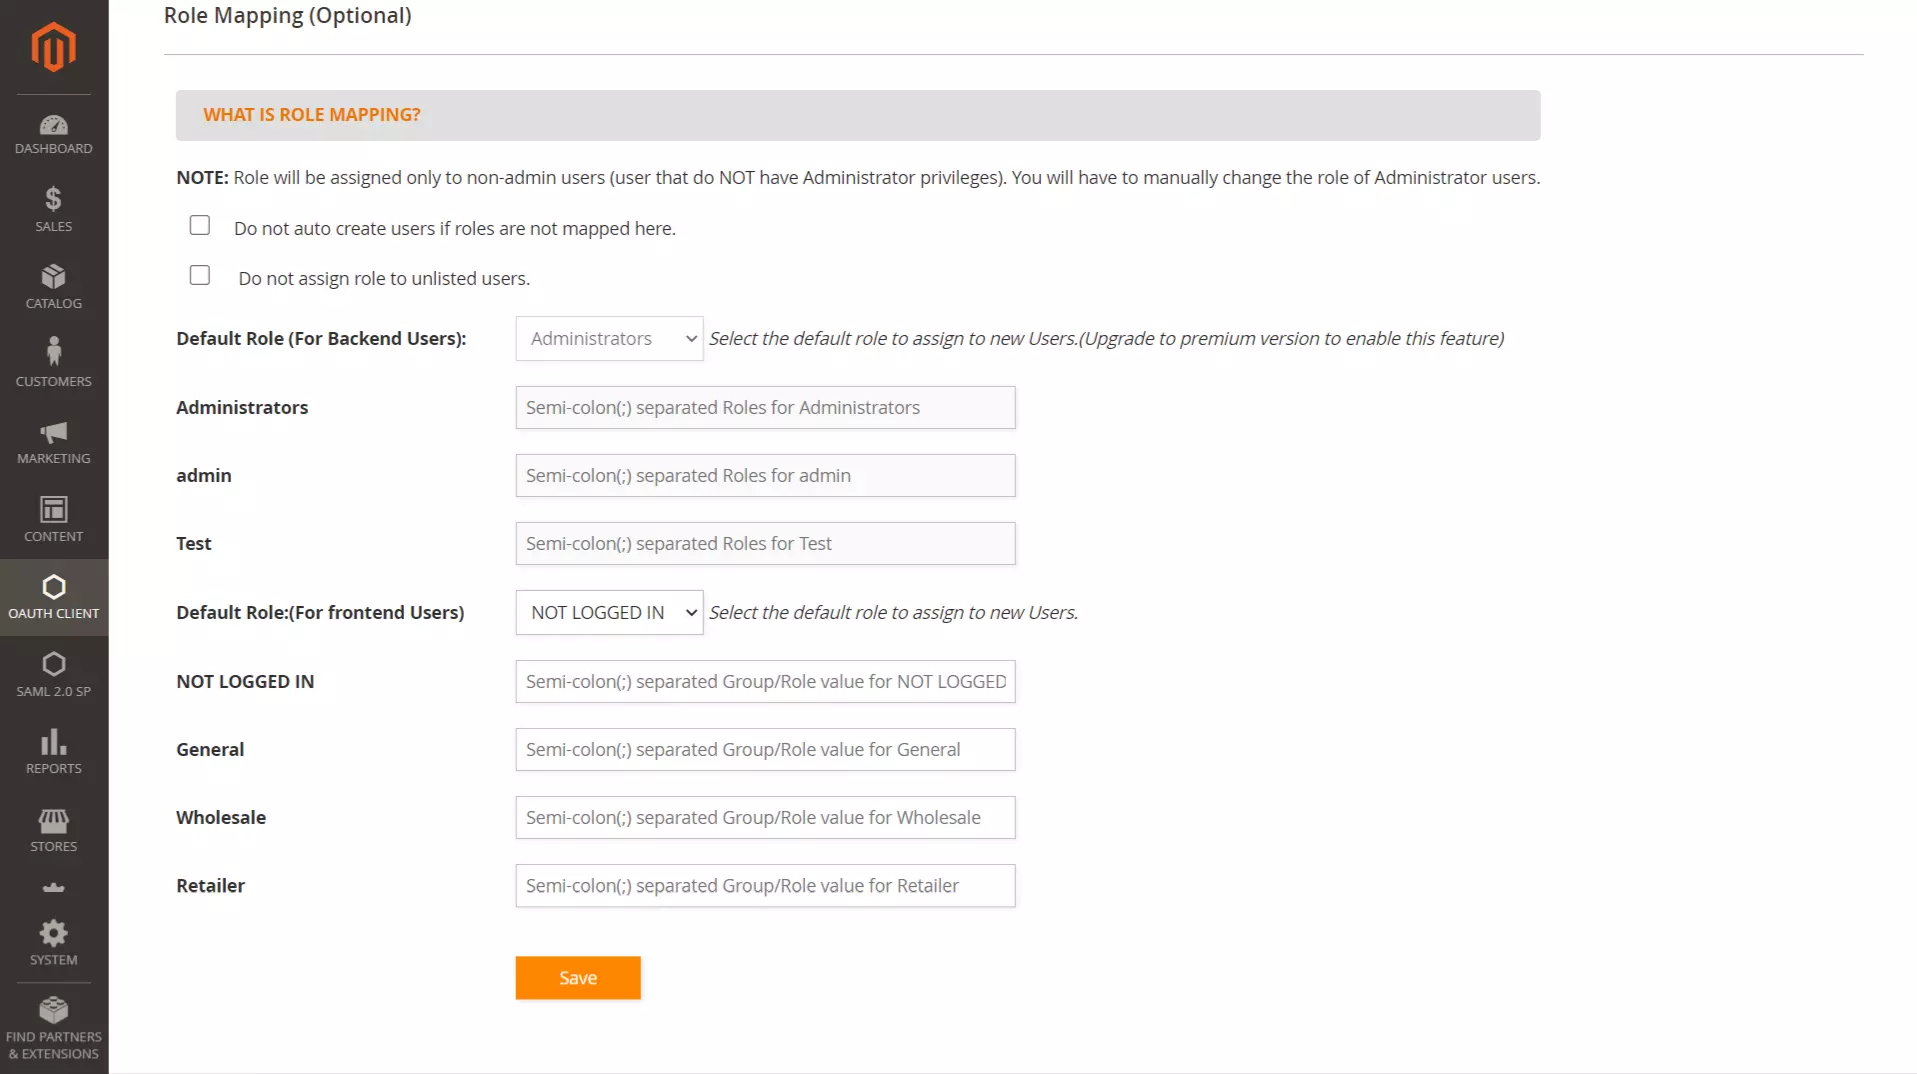 Onelogin Magento SSO - Onelogin Single Sign-On(SSO) Login in Magento - role mapping